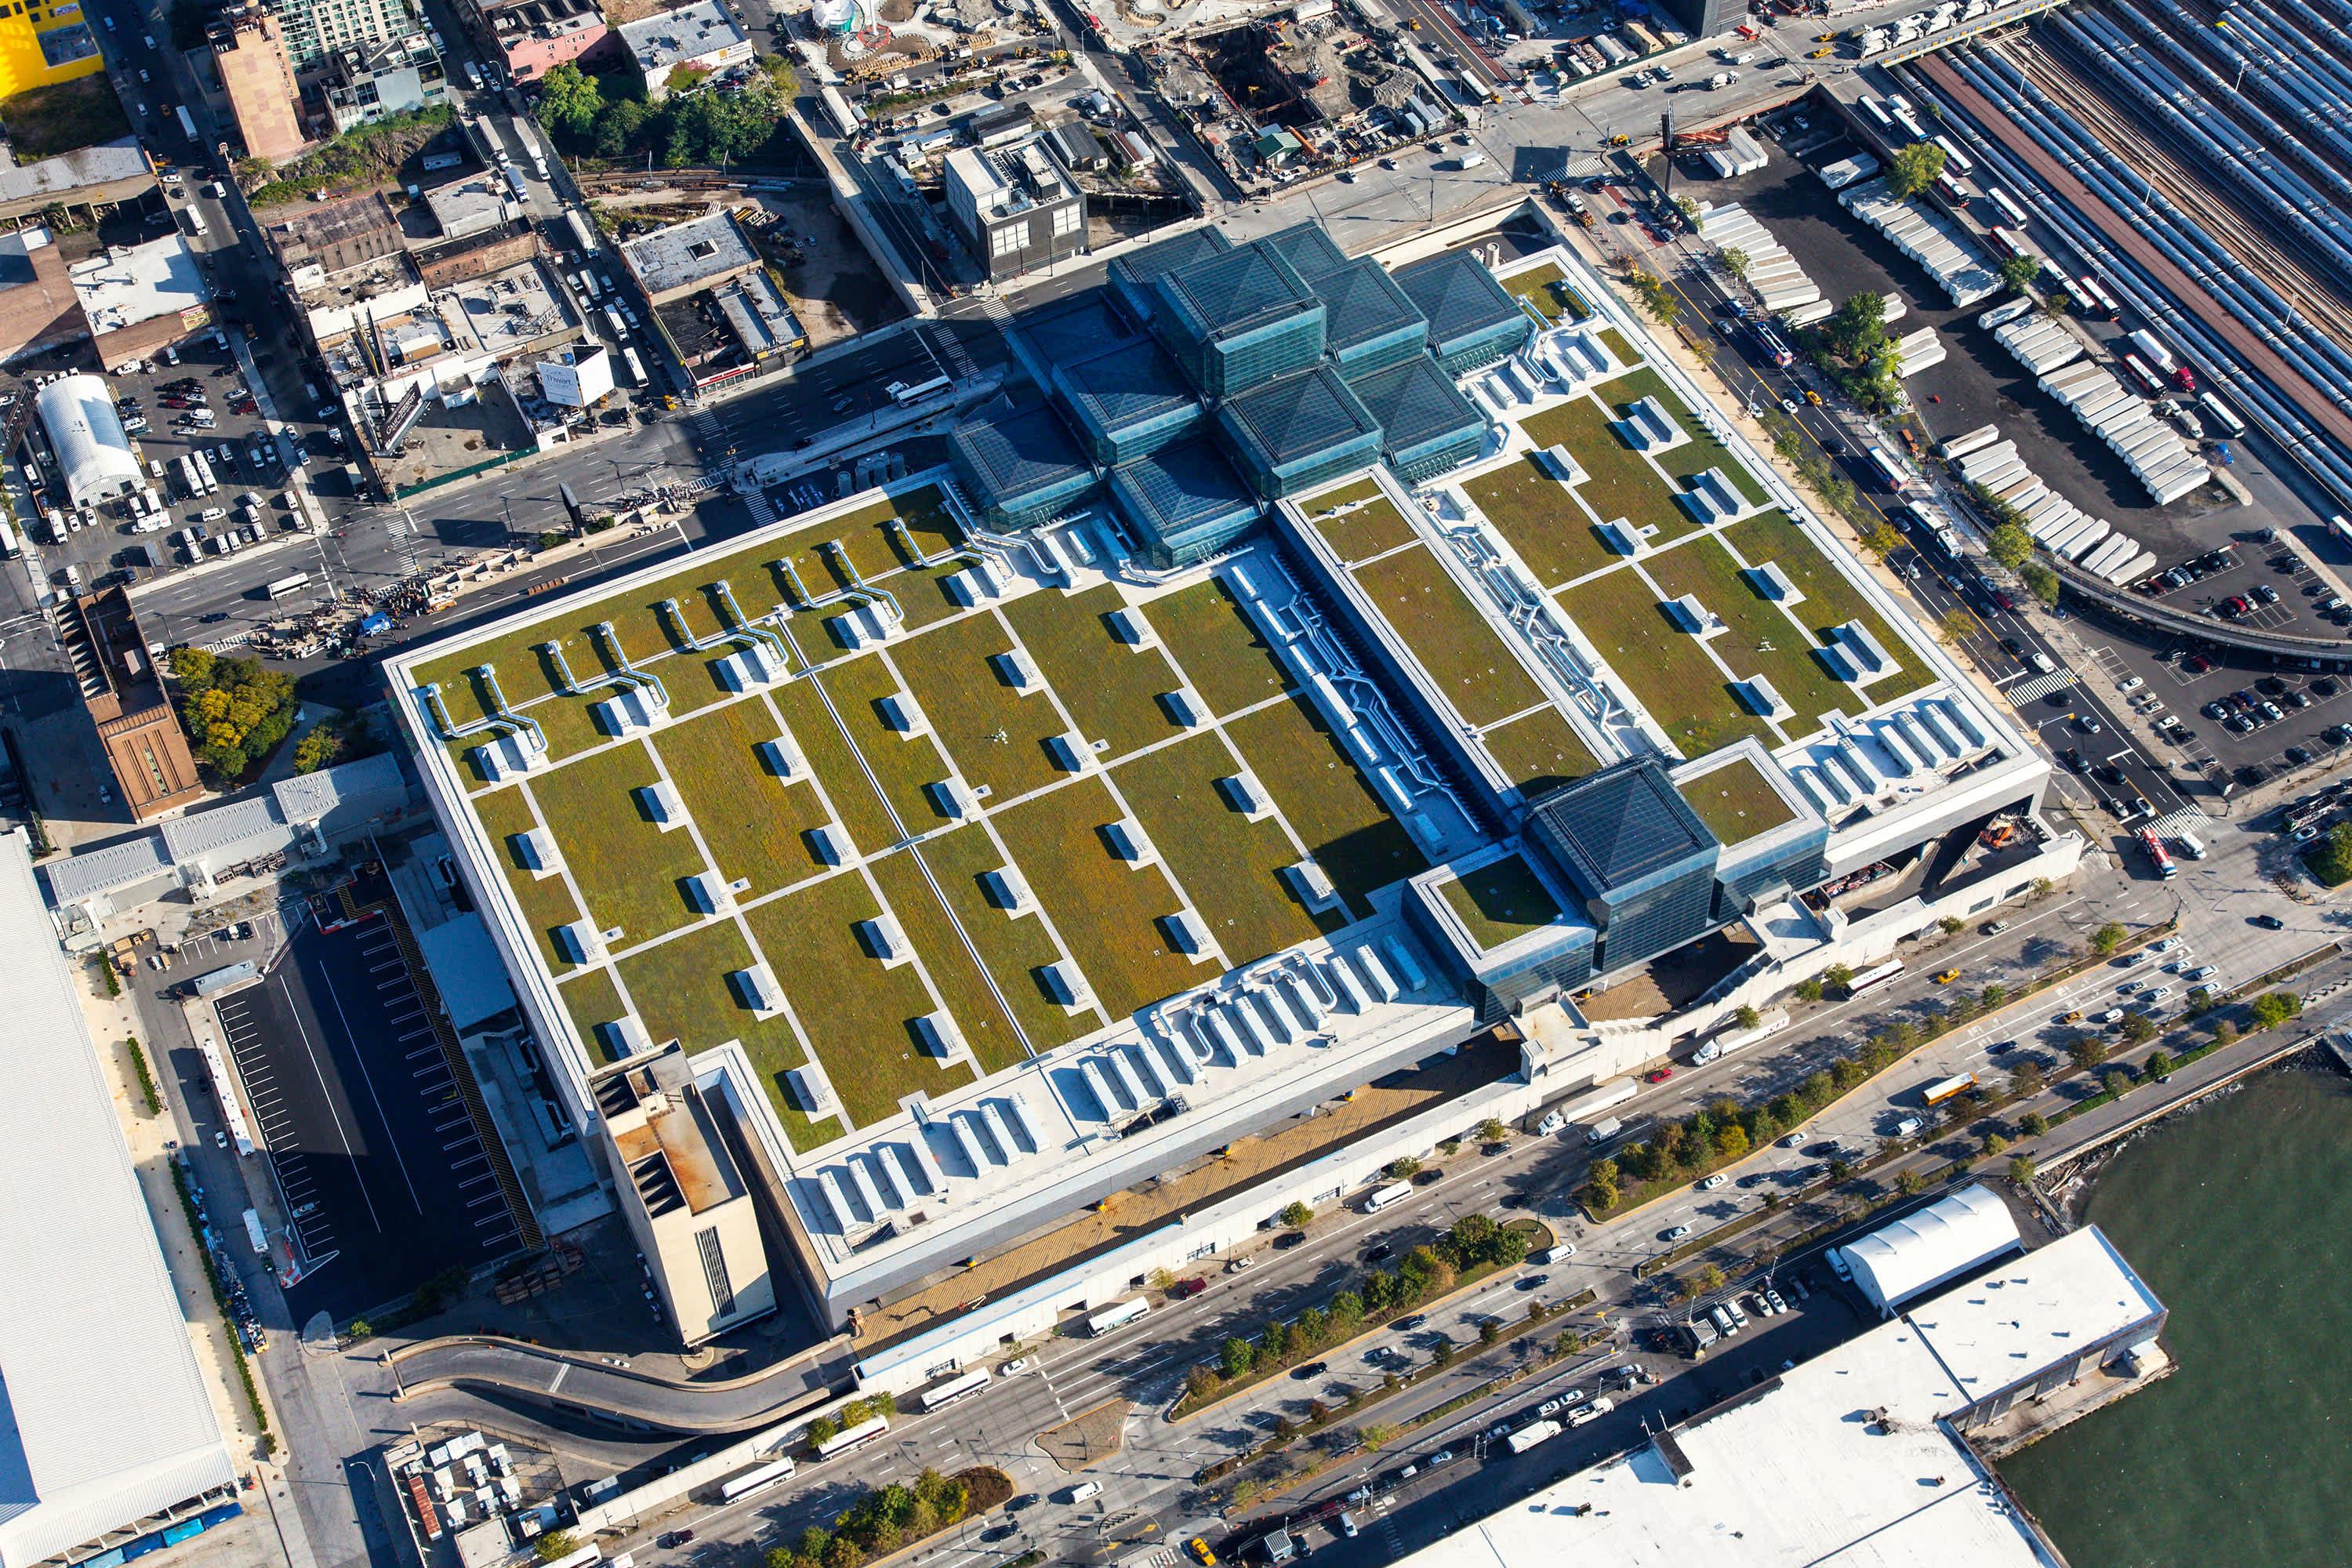 Jacob K. Javits Convention Center green roof